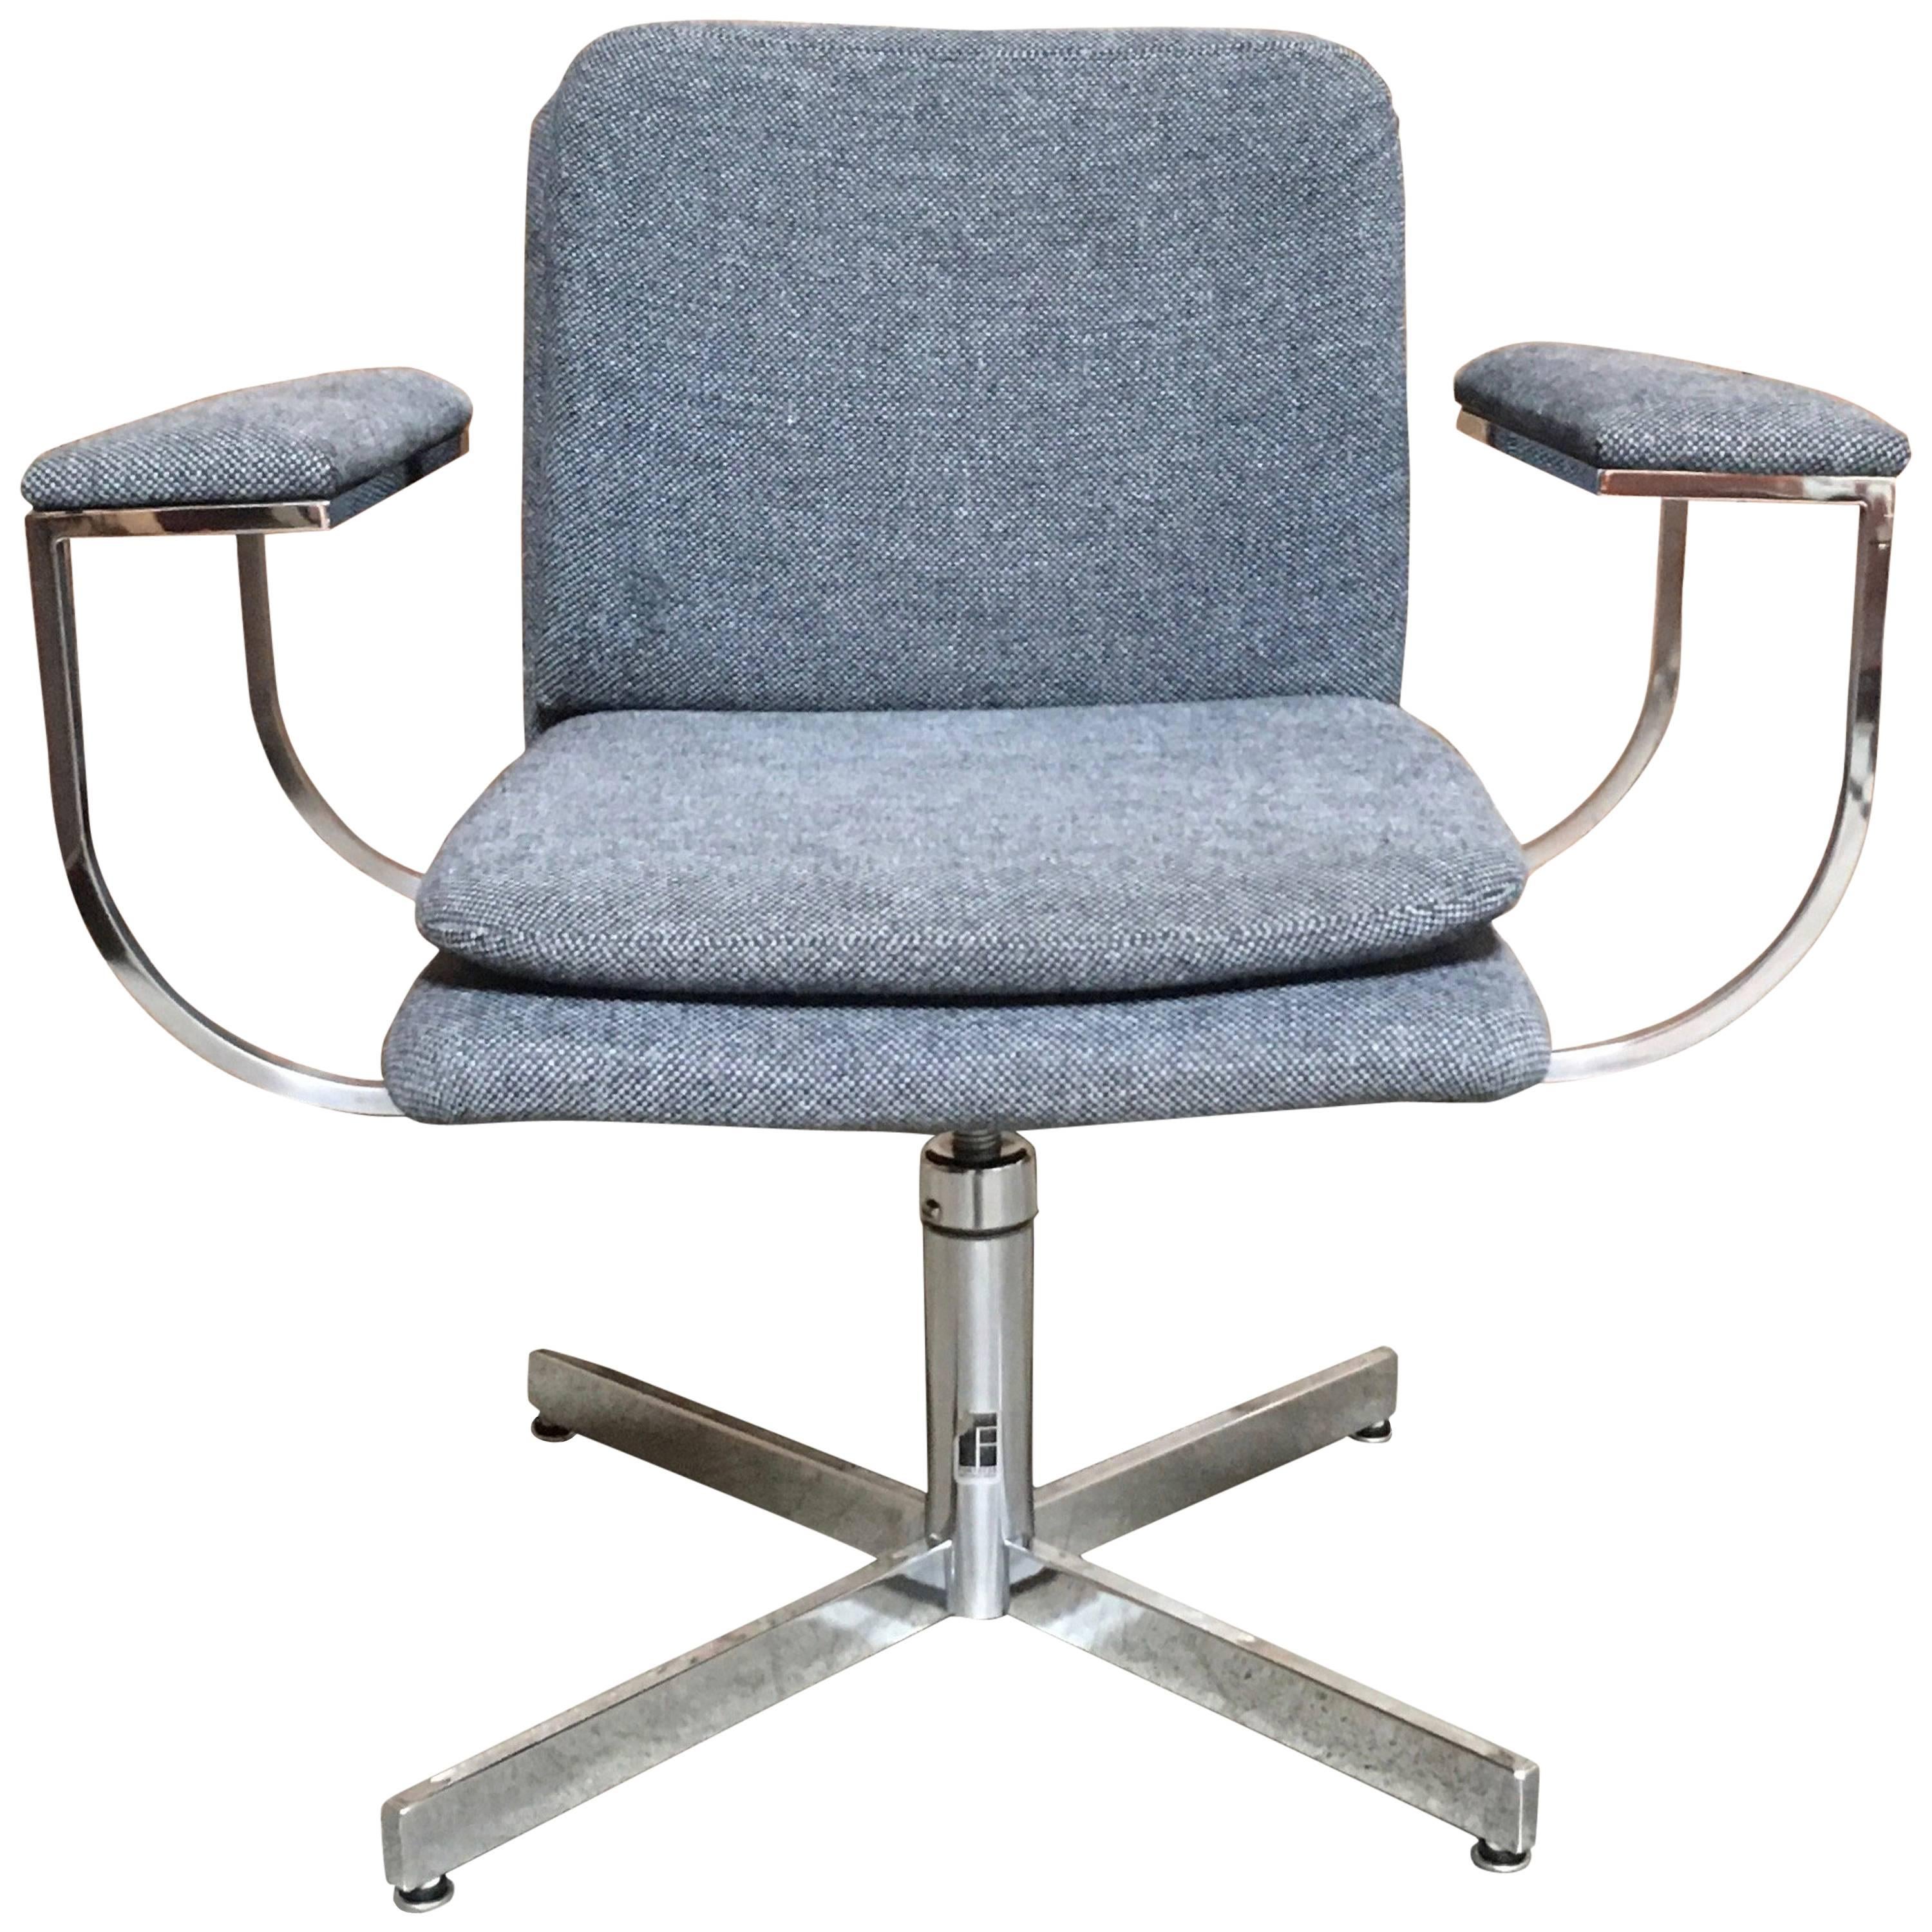 Chrome Swivel Desk Chair by Fortress